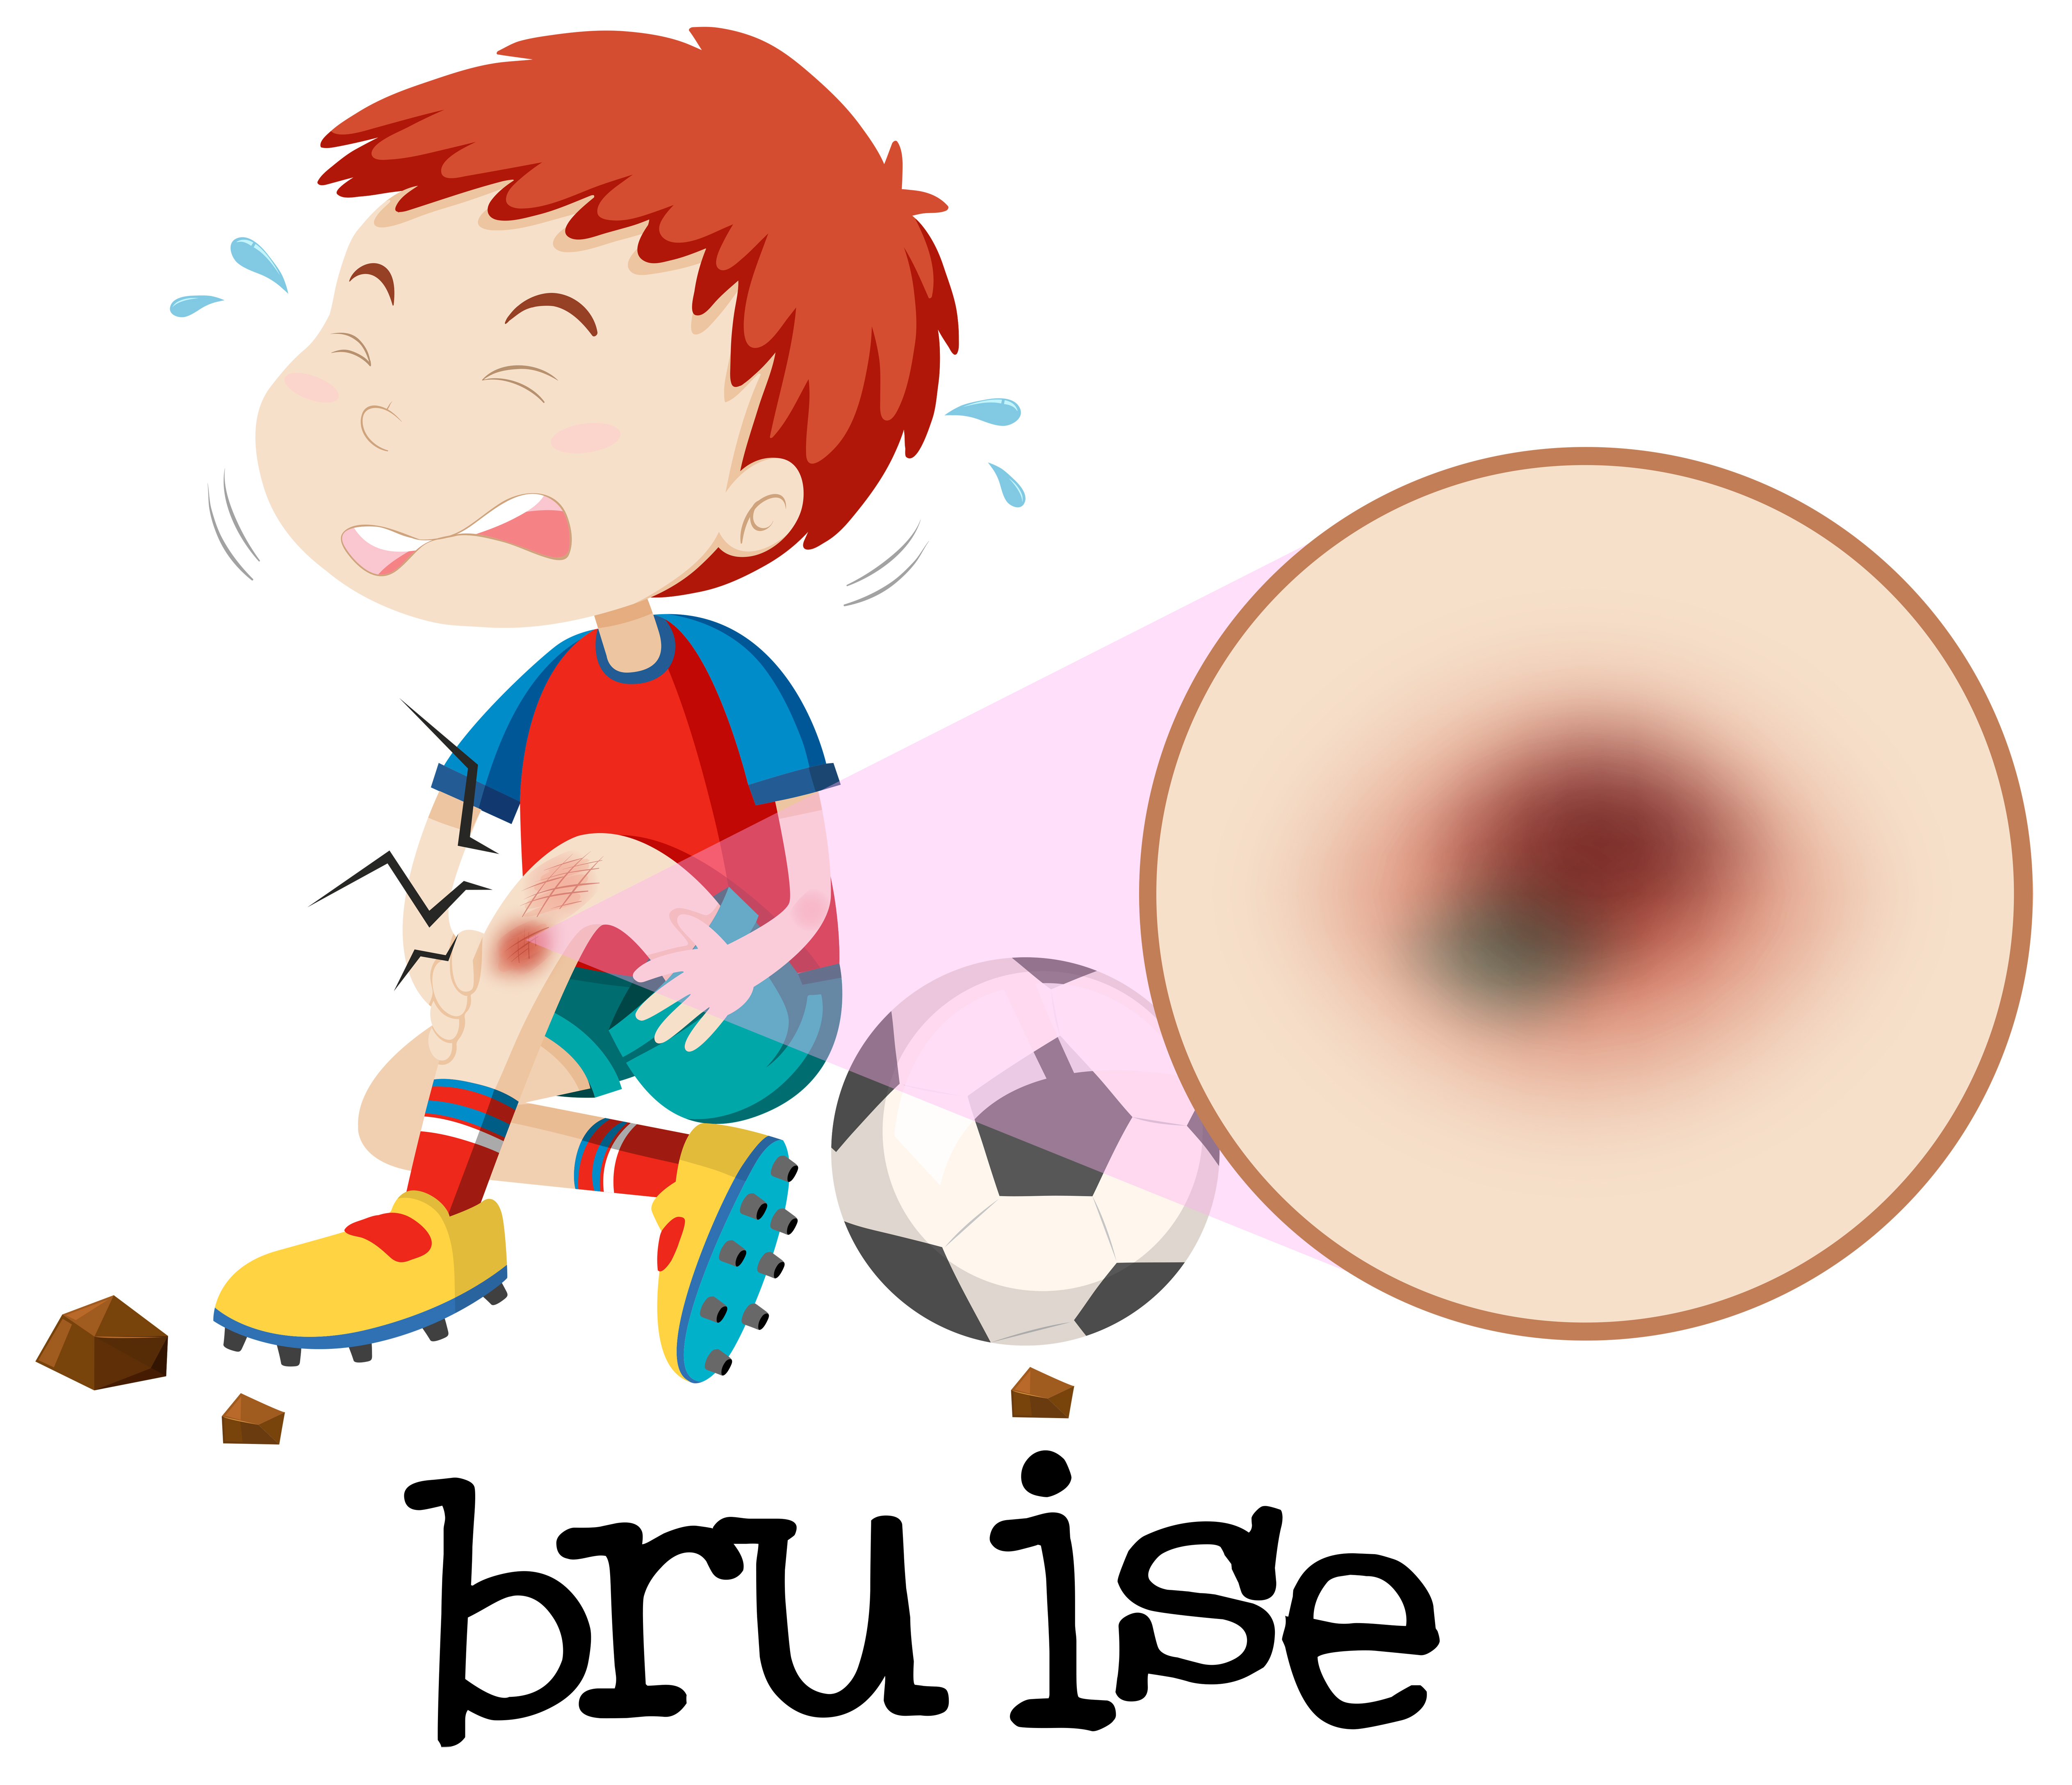 Download the A Young Boy Habing Bruise 296522